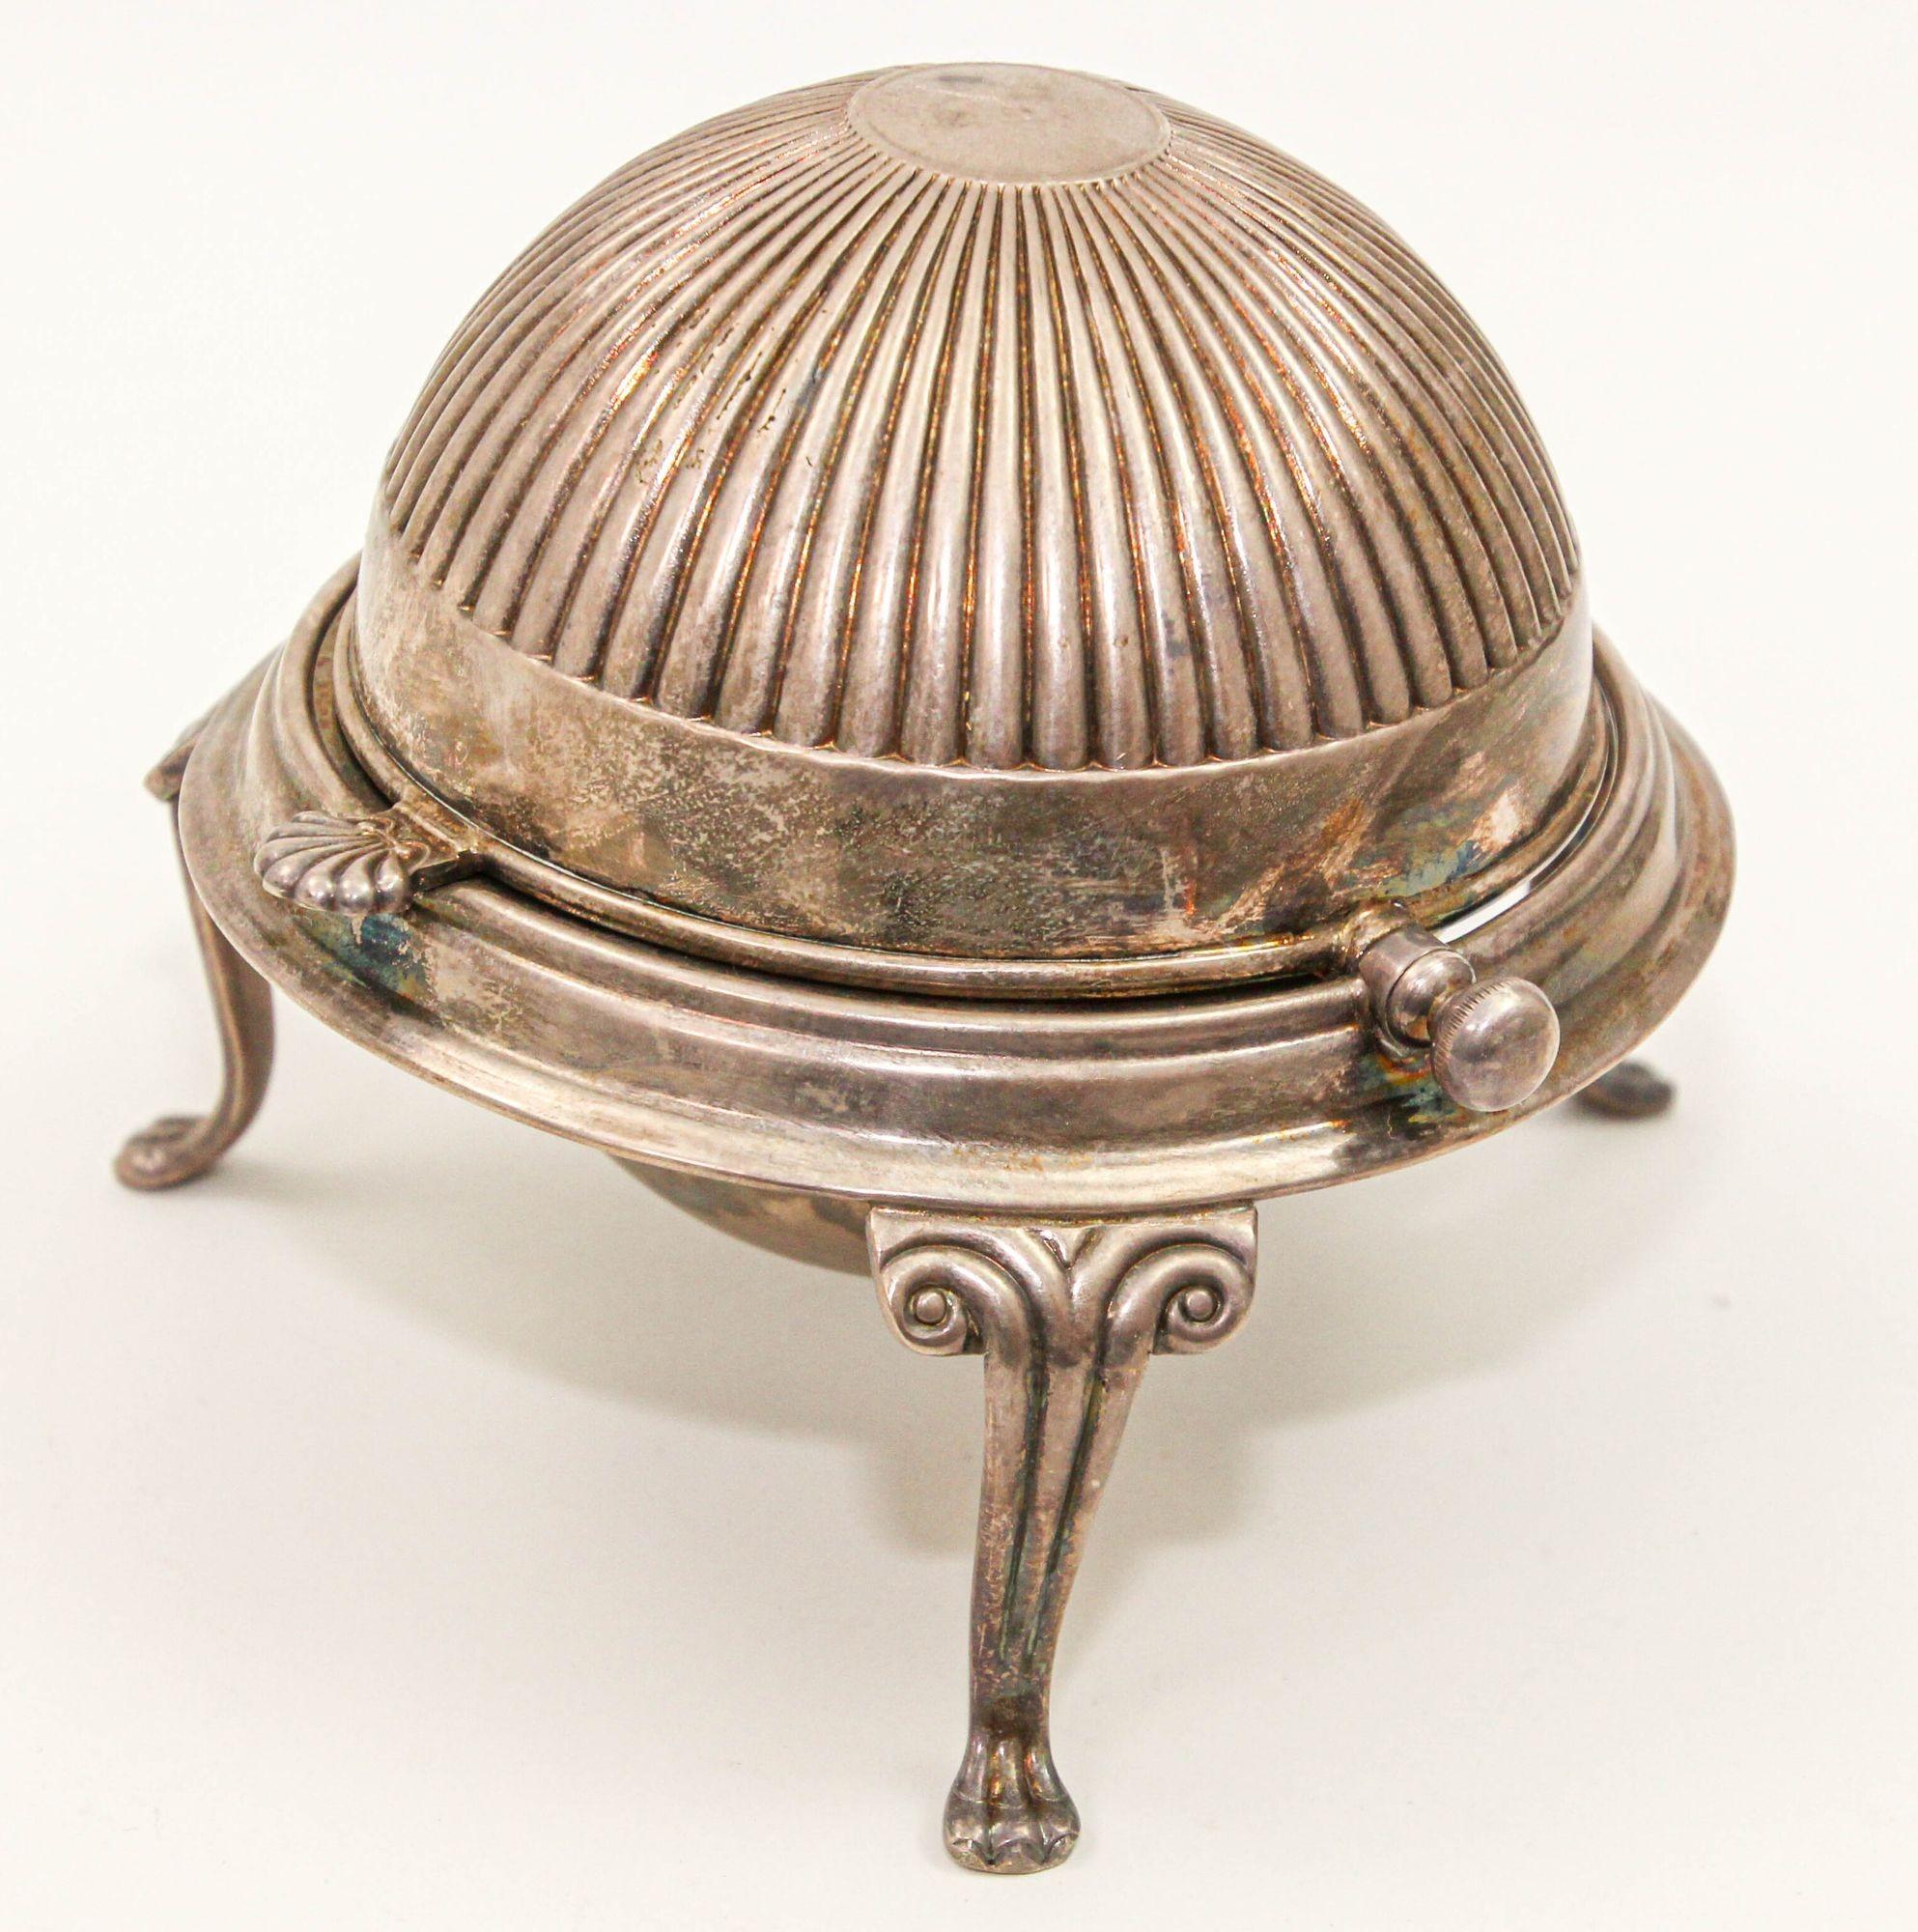 English Georgian Caviar Sheffield Silver Plate Serving Dish with Revolving Lid Circa 1940.
Vintage silver plated metal roll top globe dome container box, could be use to serve caviar or sugar.
Silver Server designed as a sphere shape Roll Top Caviar